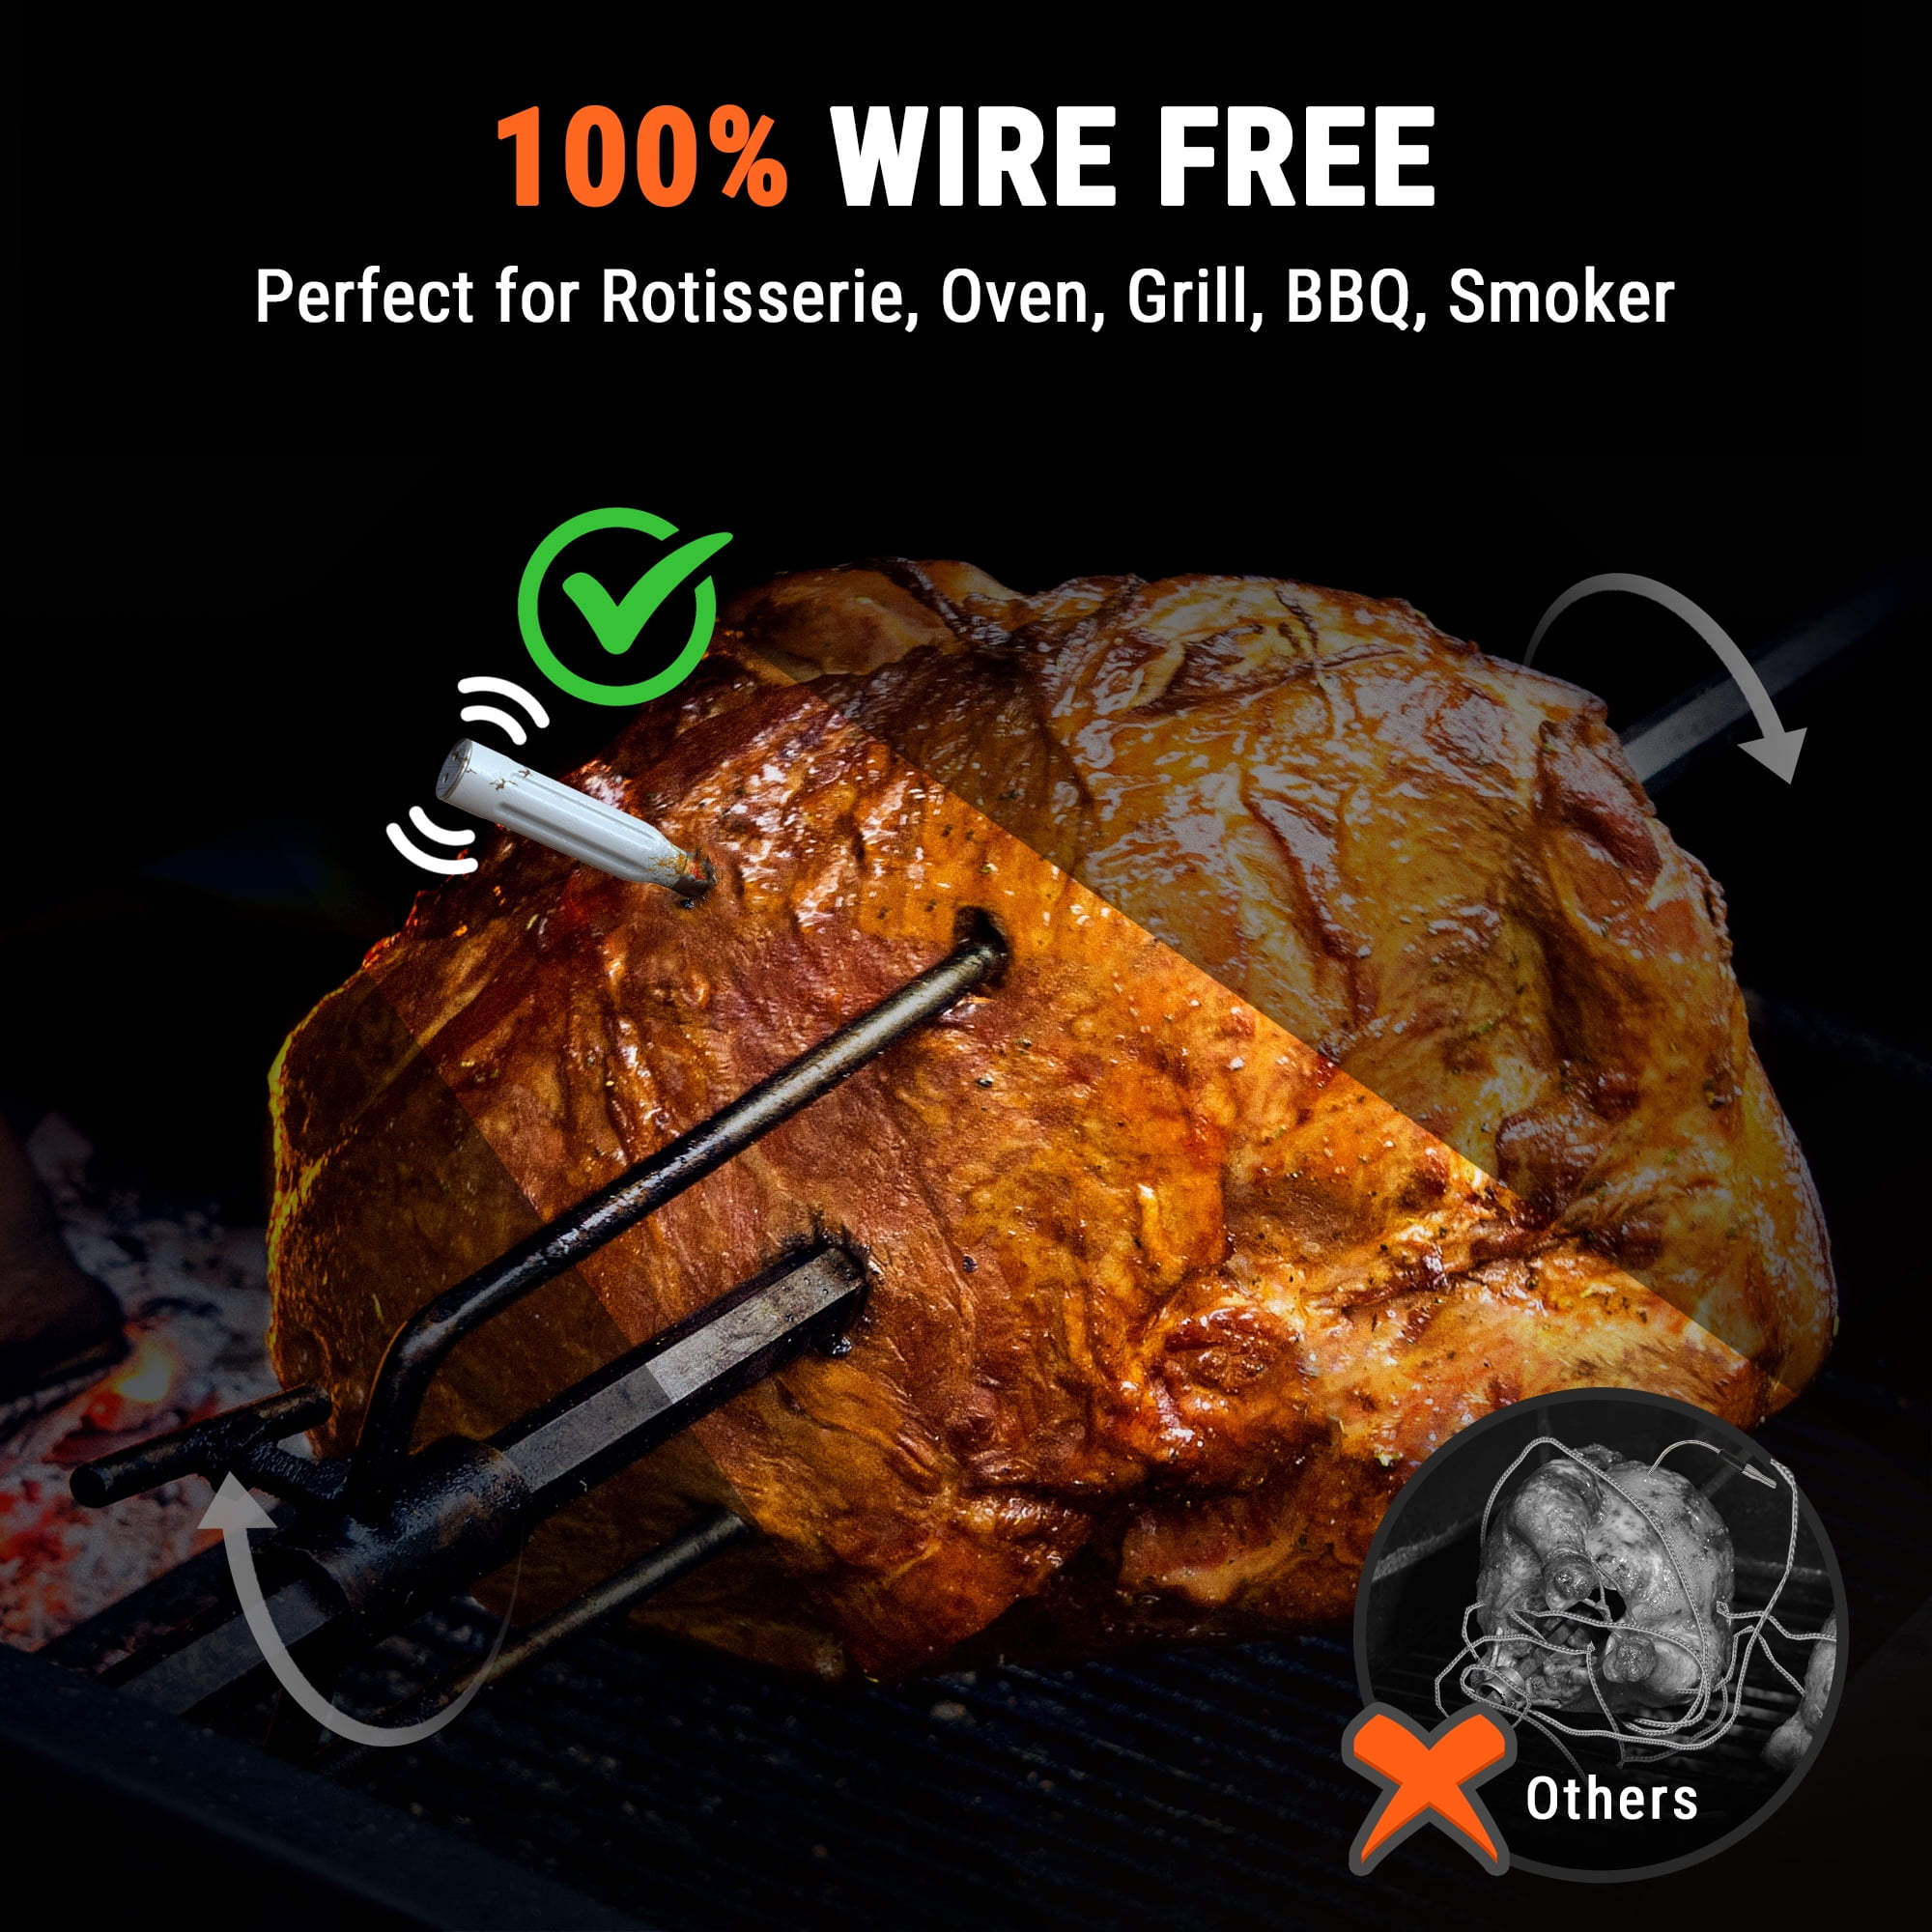 ThermoPro TempSpike 500FT Truly Wireless Meat Thermometer+ThermoPro TP03  Digital Meat Thermometer for Cooking